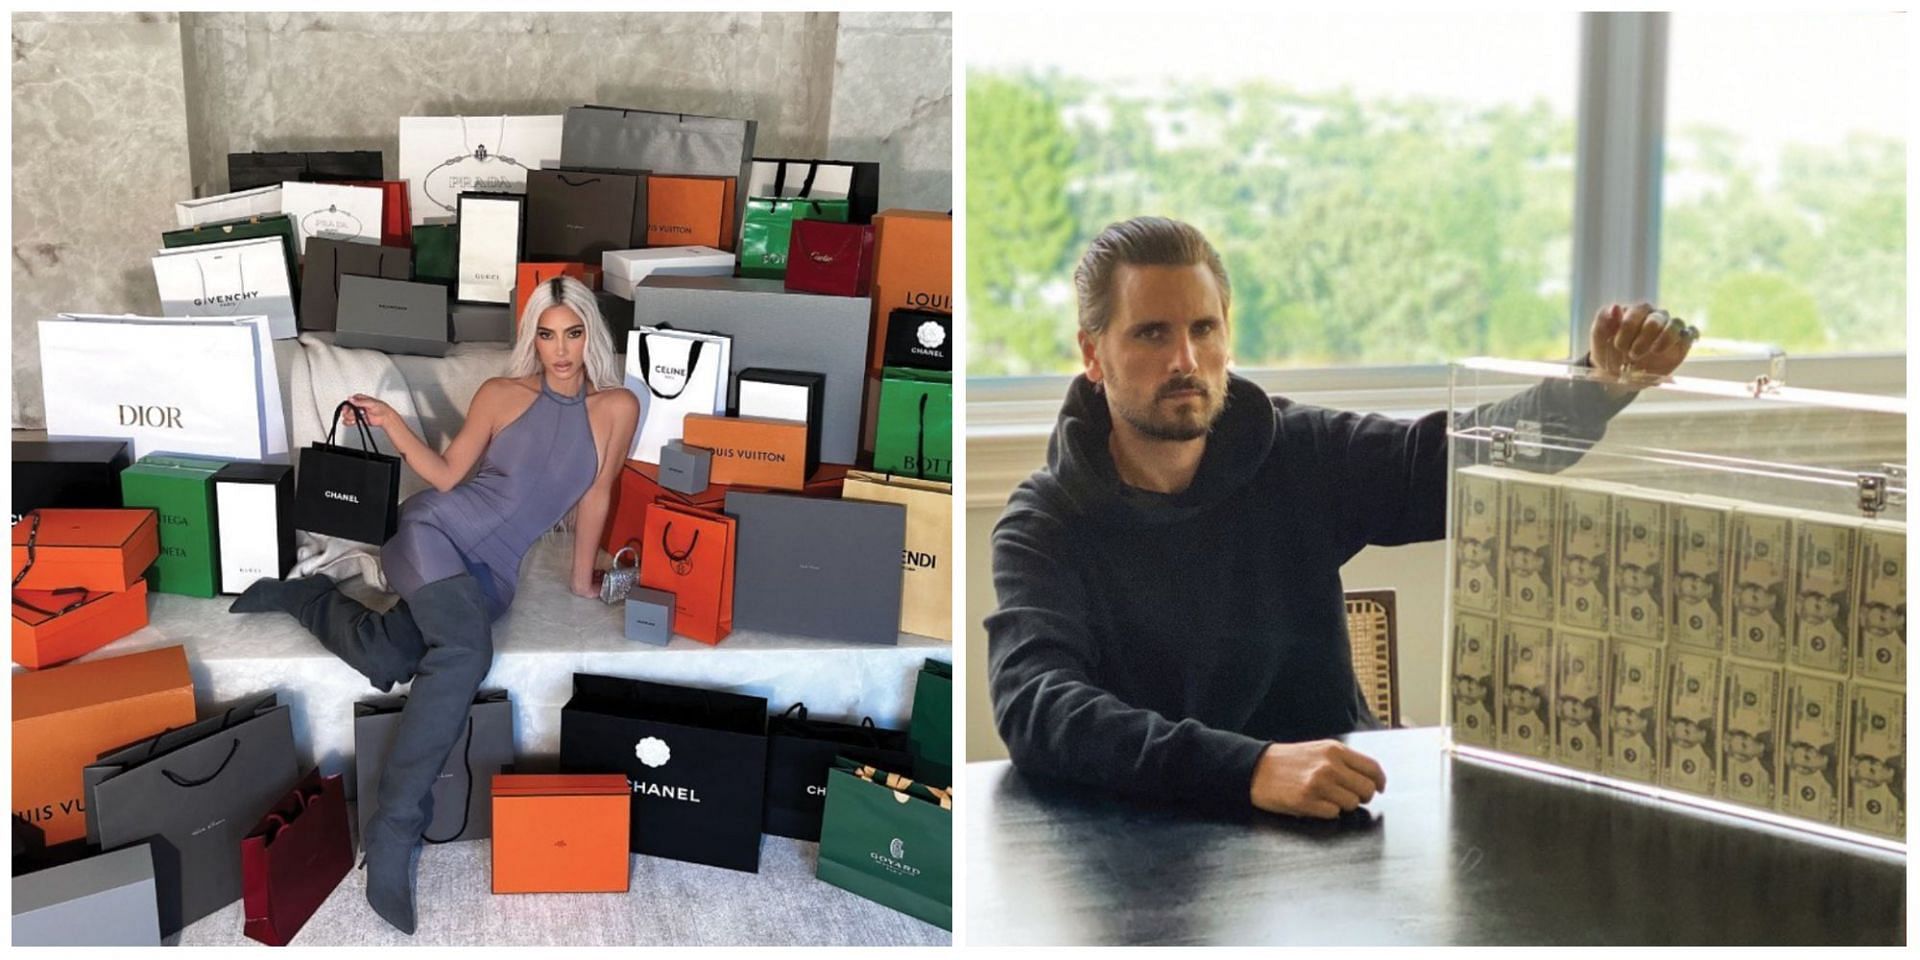 Kim Kardashian and Scott Disick in hot waters: Why are the two being sued for $40 million? Details explored. (Image via Curated Business / Instagram)